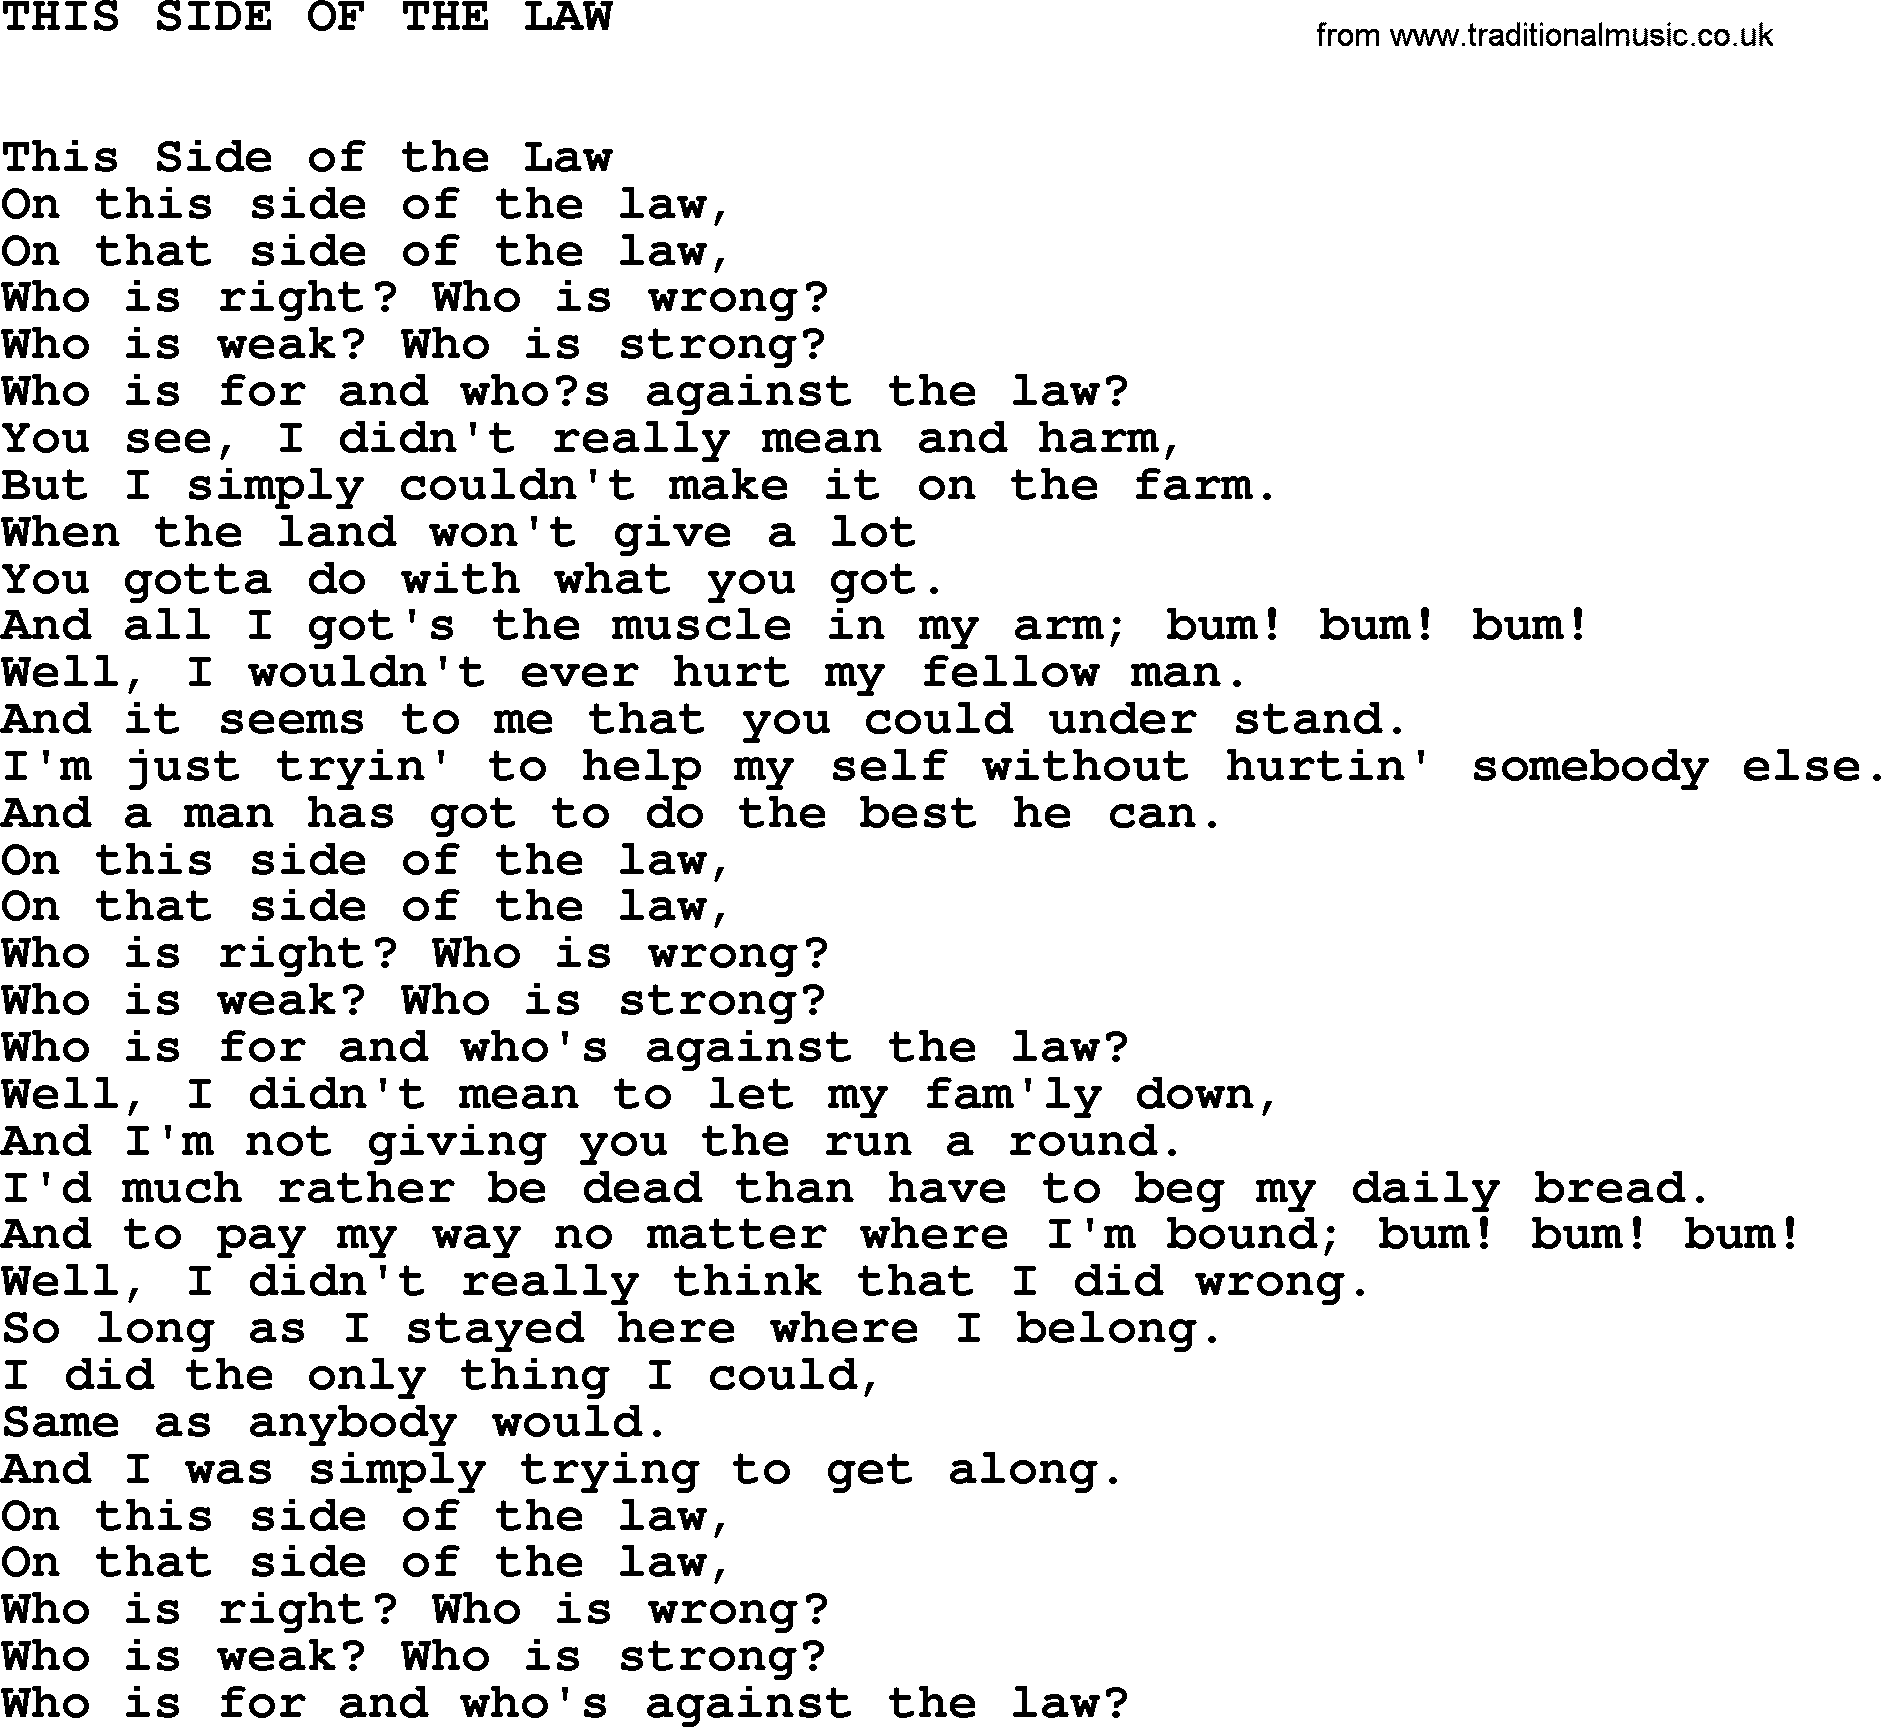 Johnny Cash song This Side Of The Law.txt lyrics